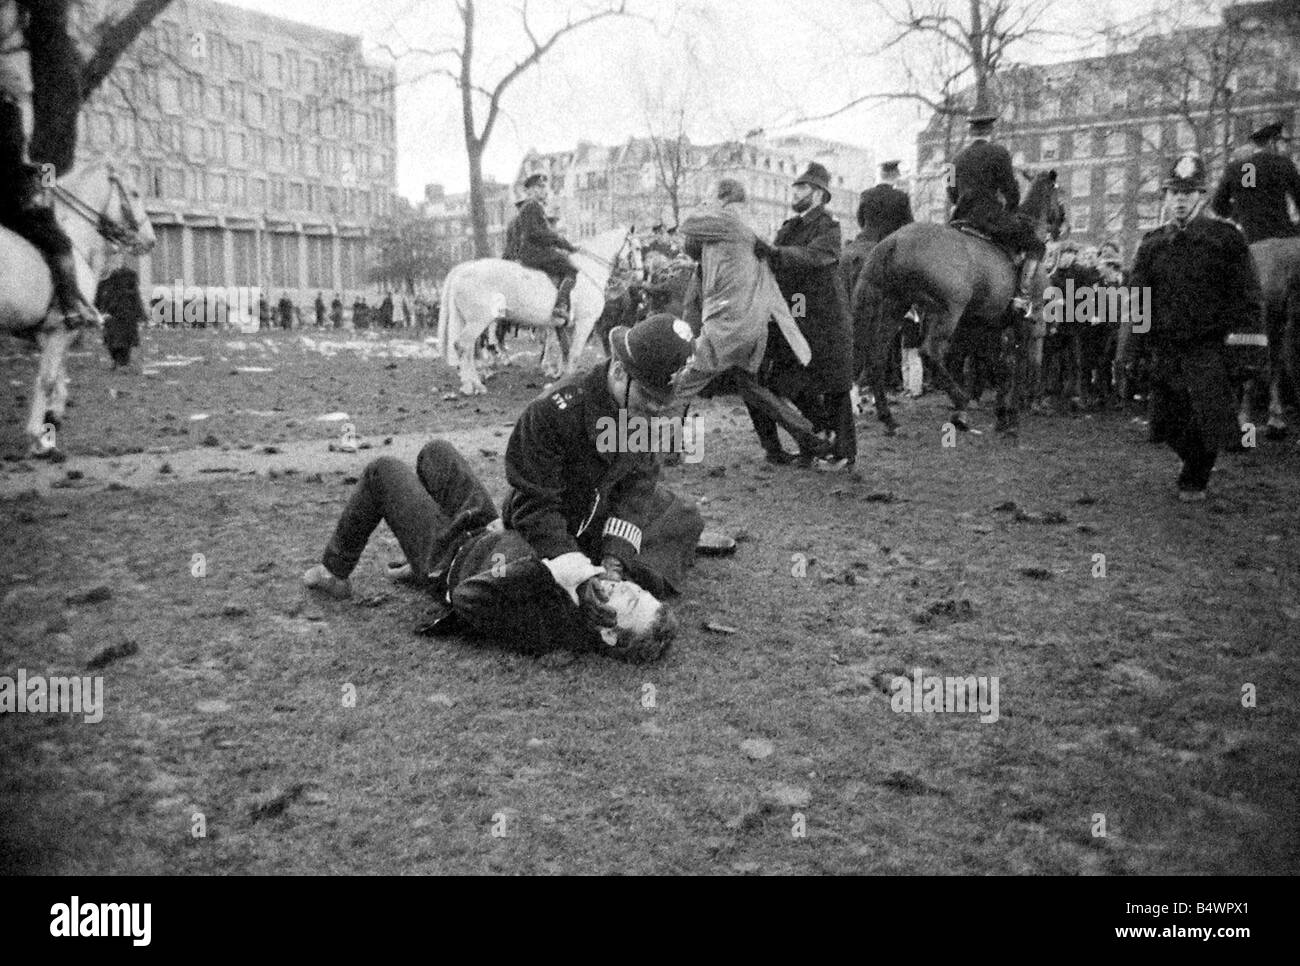 A policeman pins down a demonstrator during Riots at US Embassy, Grosvenor Square, over the on-going Vietnam Conflict.;Mar. 1968 Stock Photo